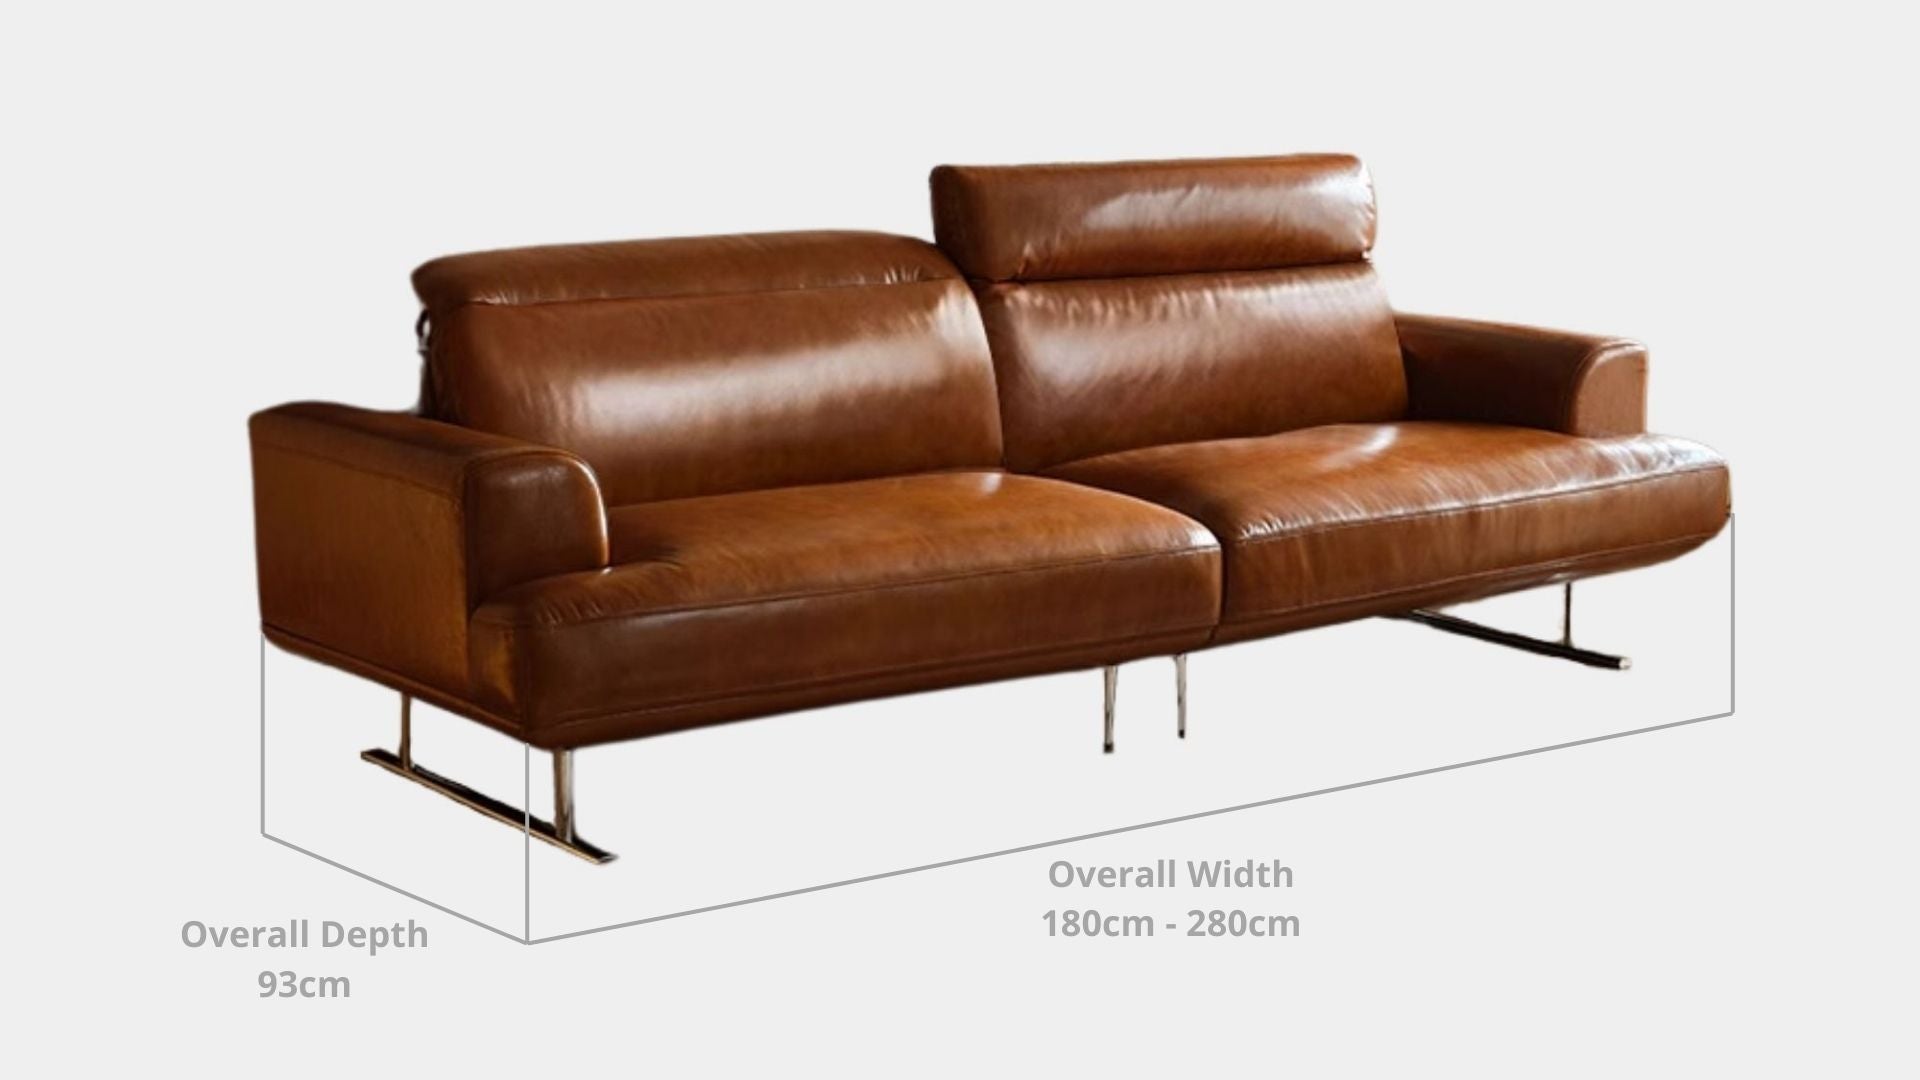 Details the key dimensions in terms of overall width, overall depth and seat width for Charles Half Leather Sofa